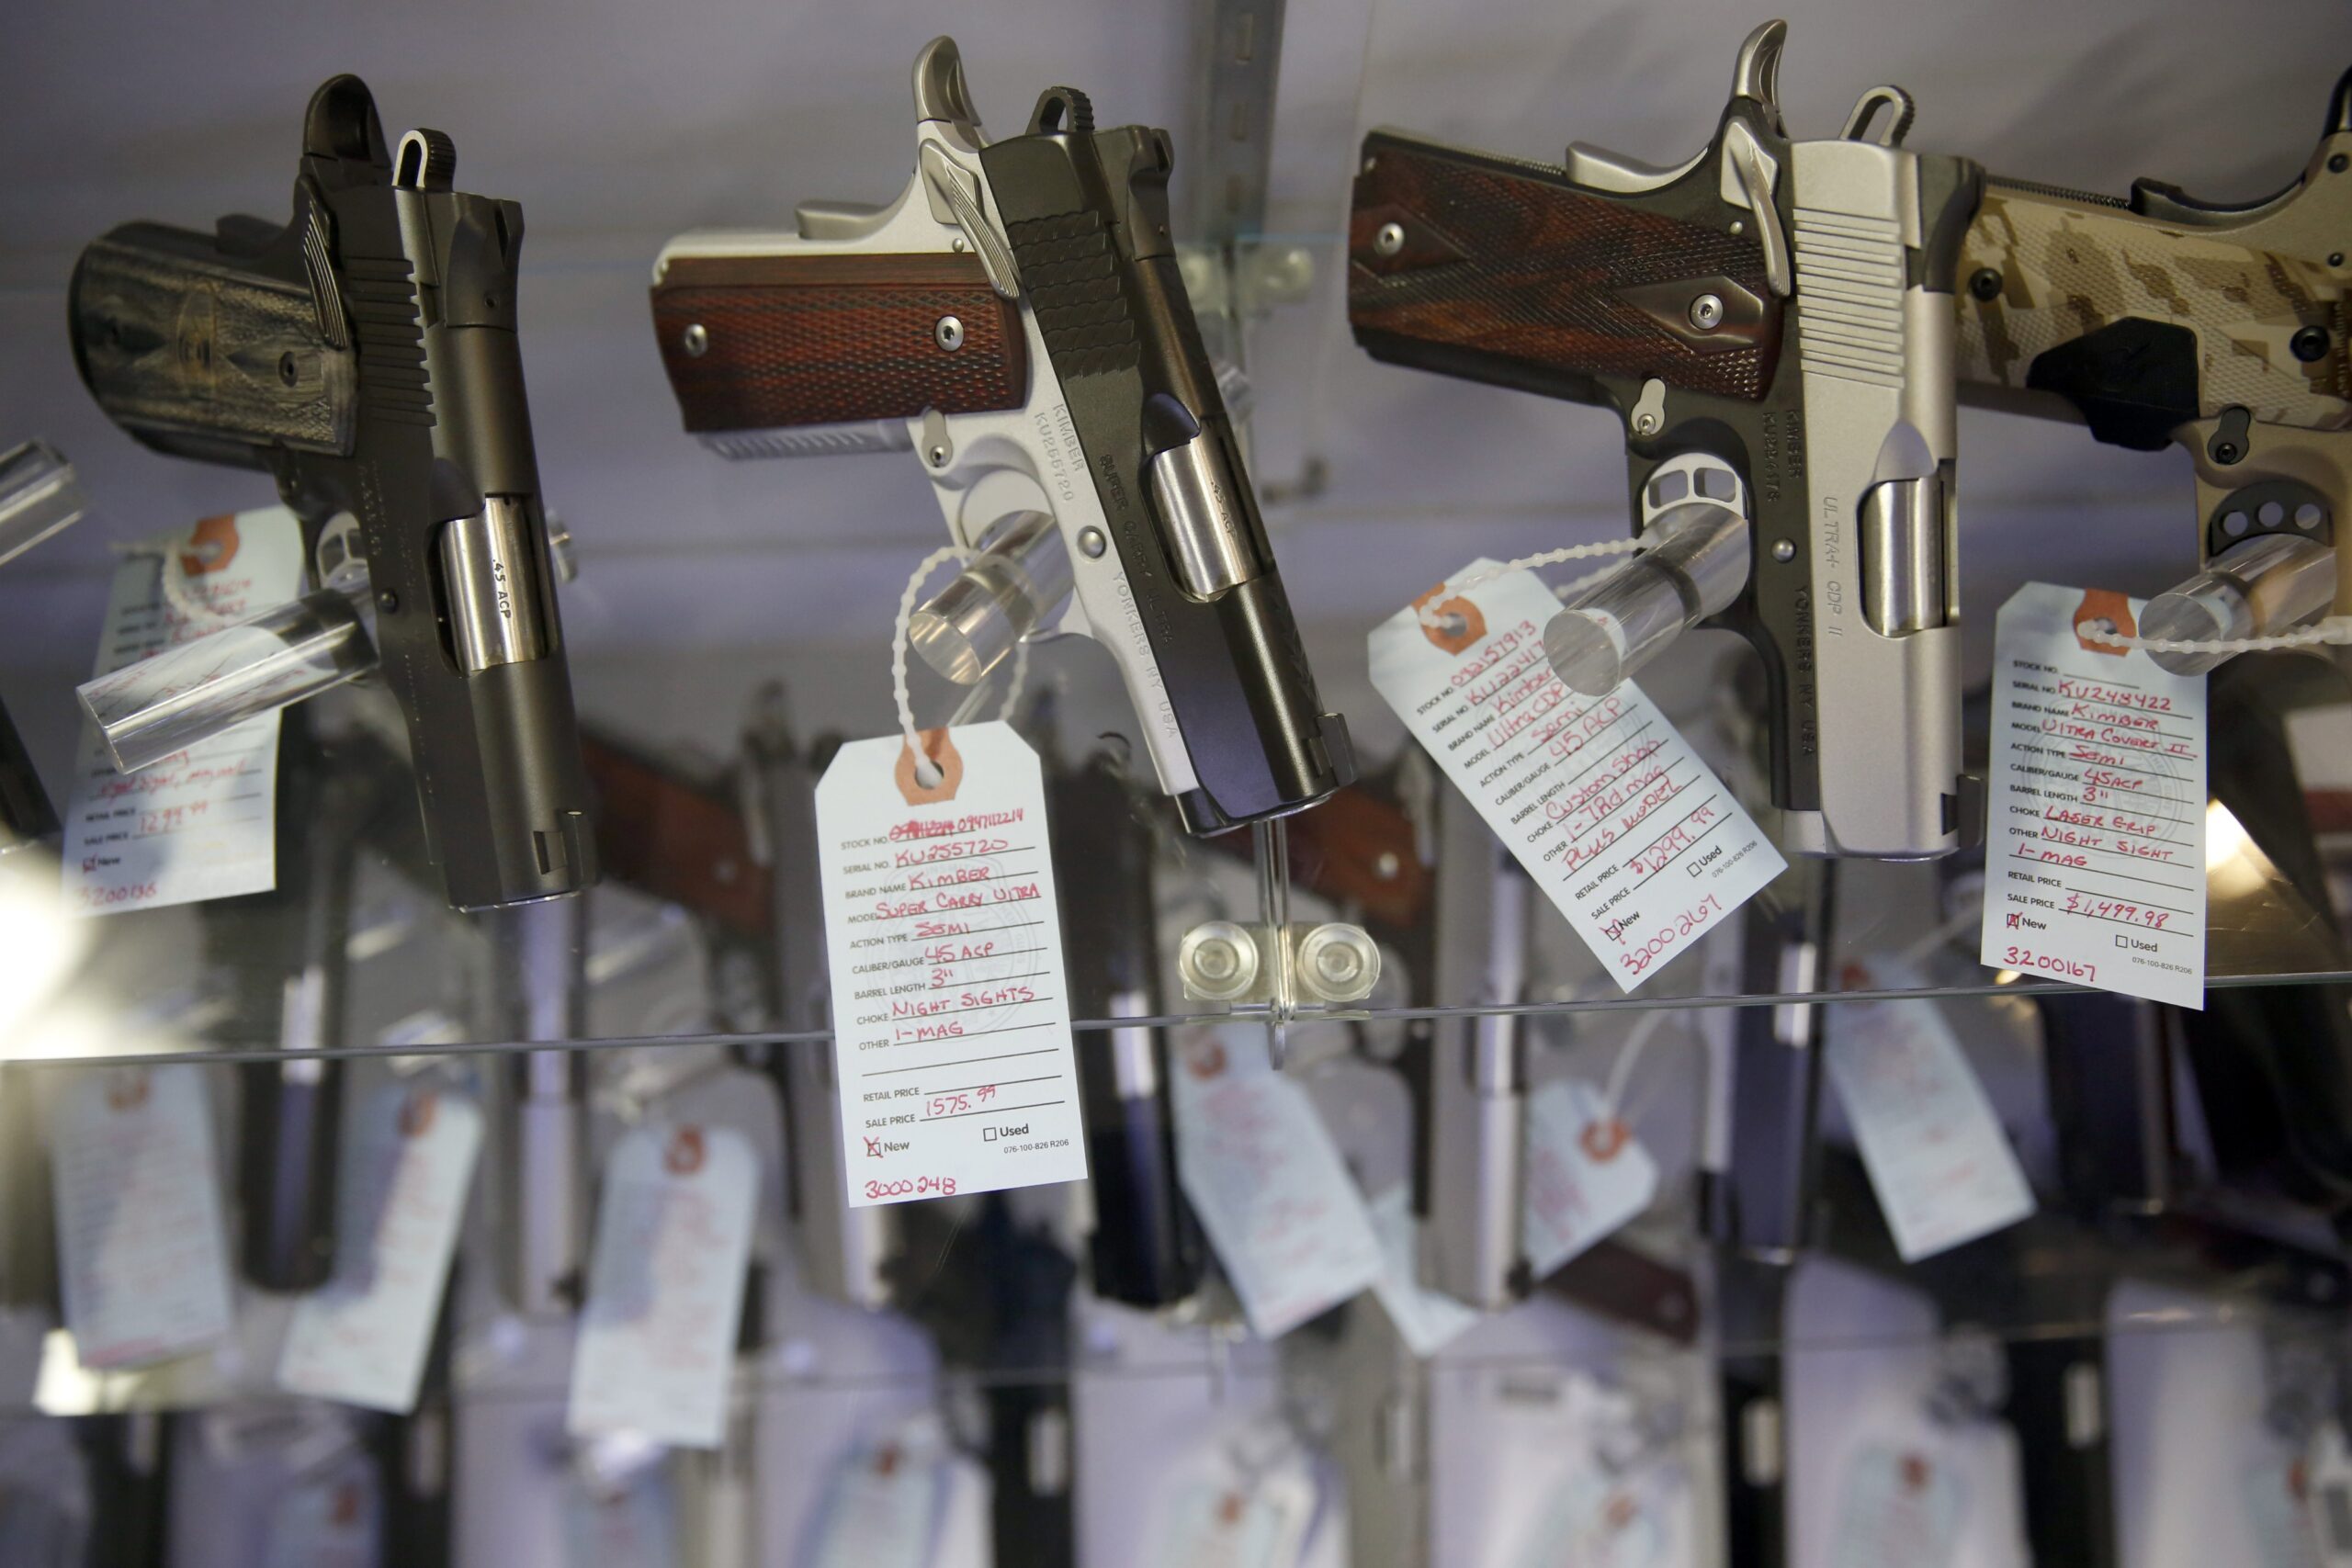 Gun safety groups support proposal to involve gun shops, ranges in suicide prevention